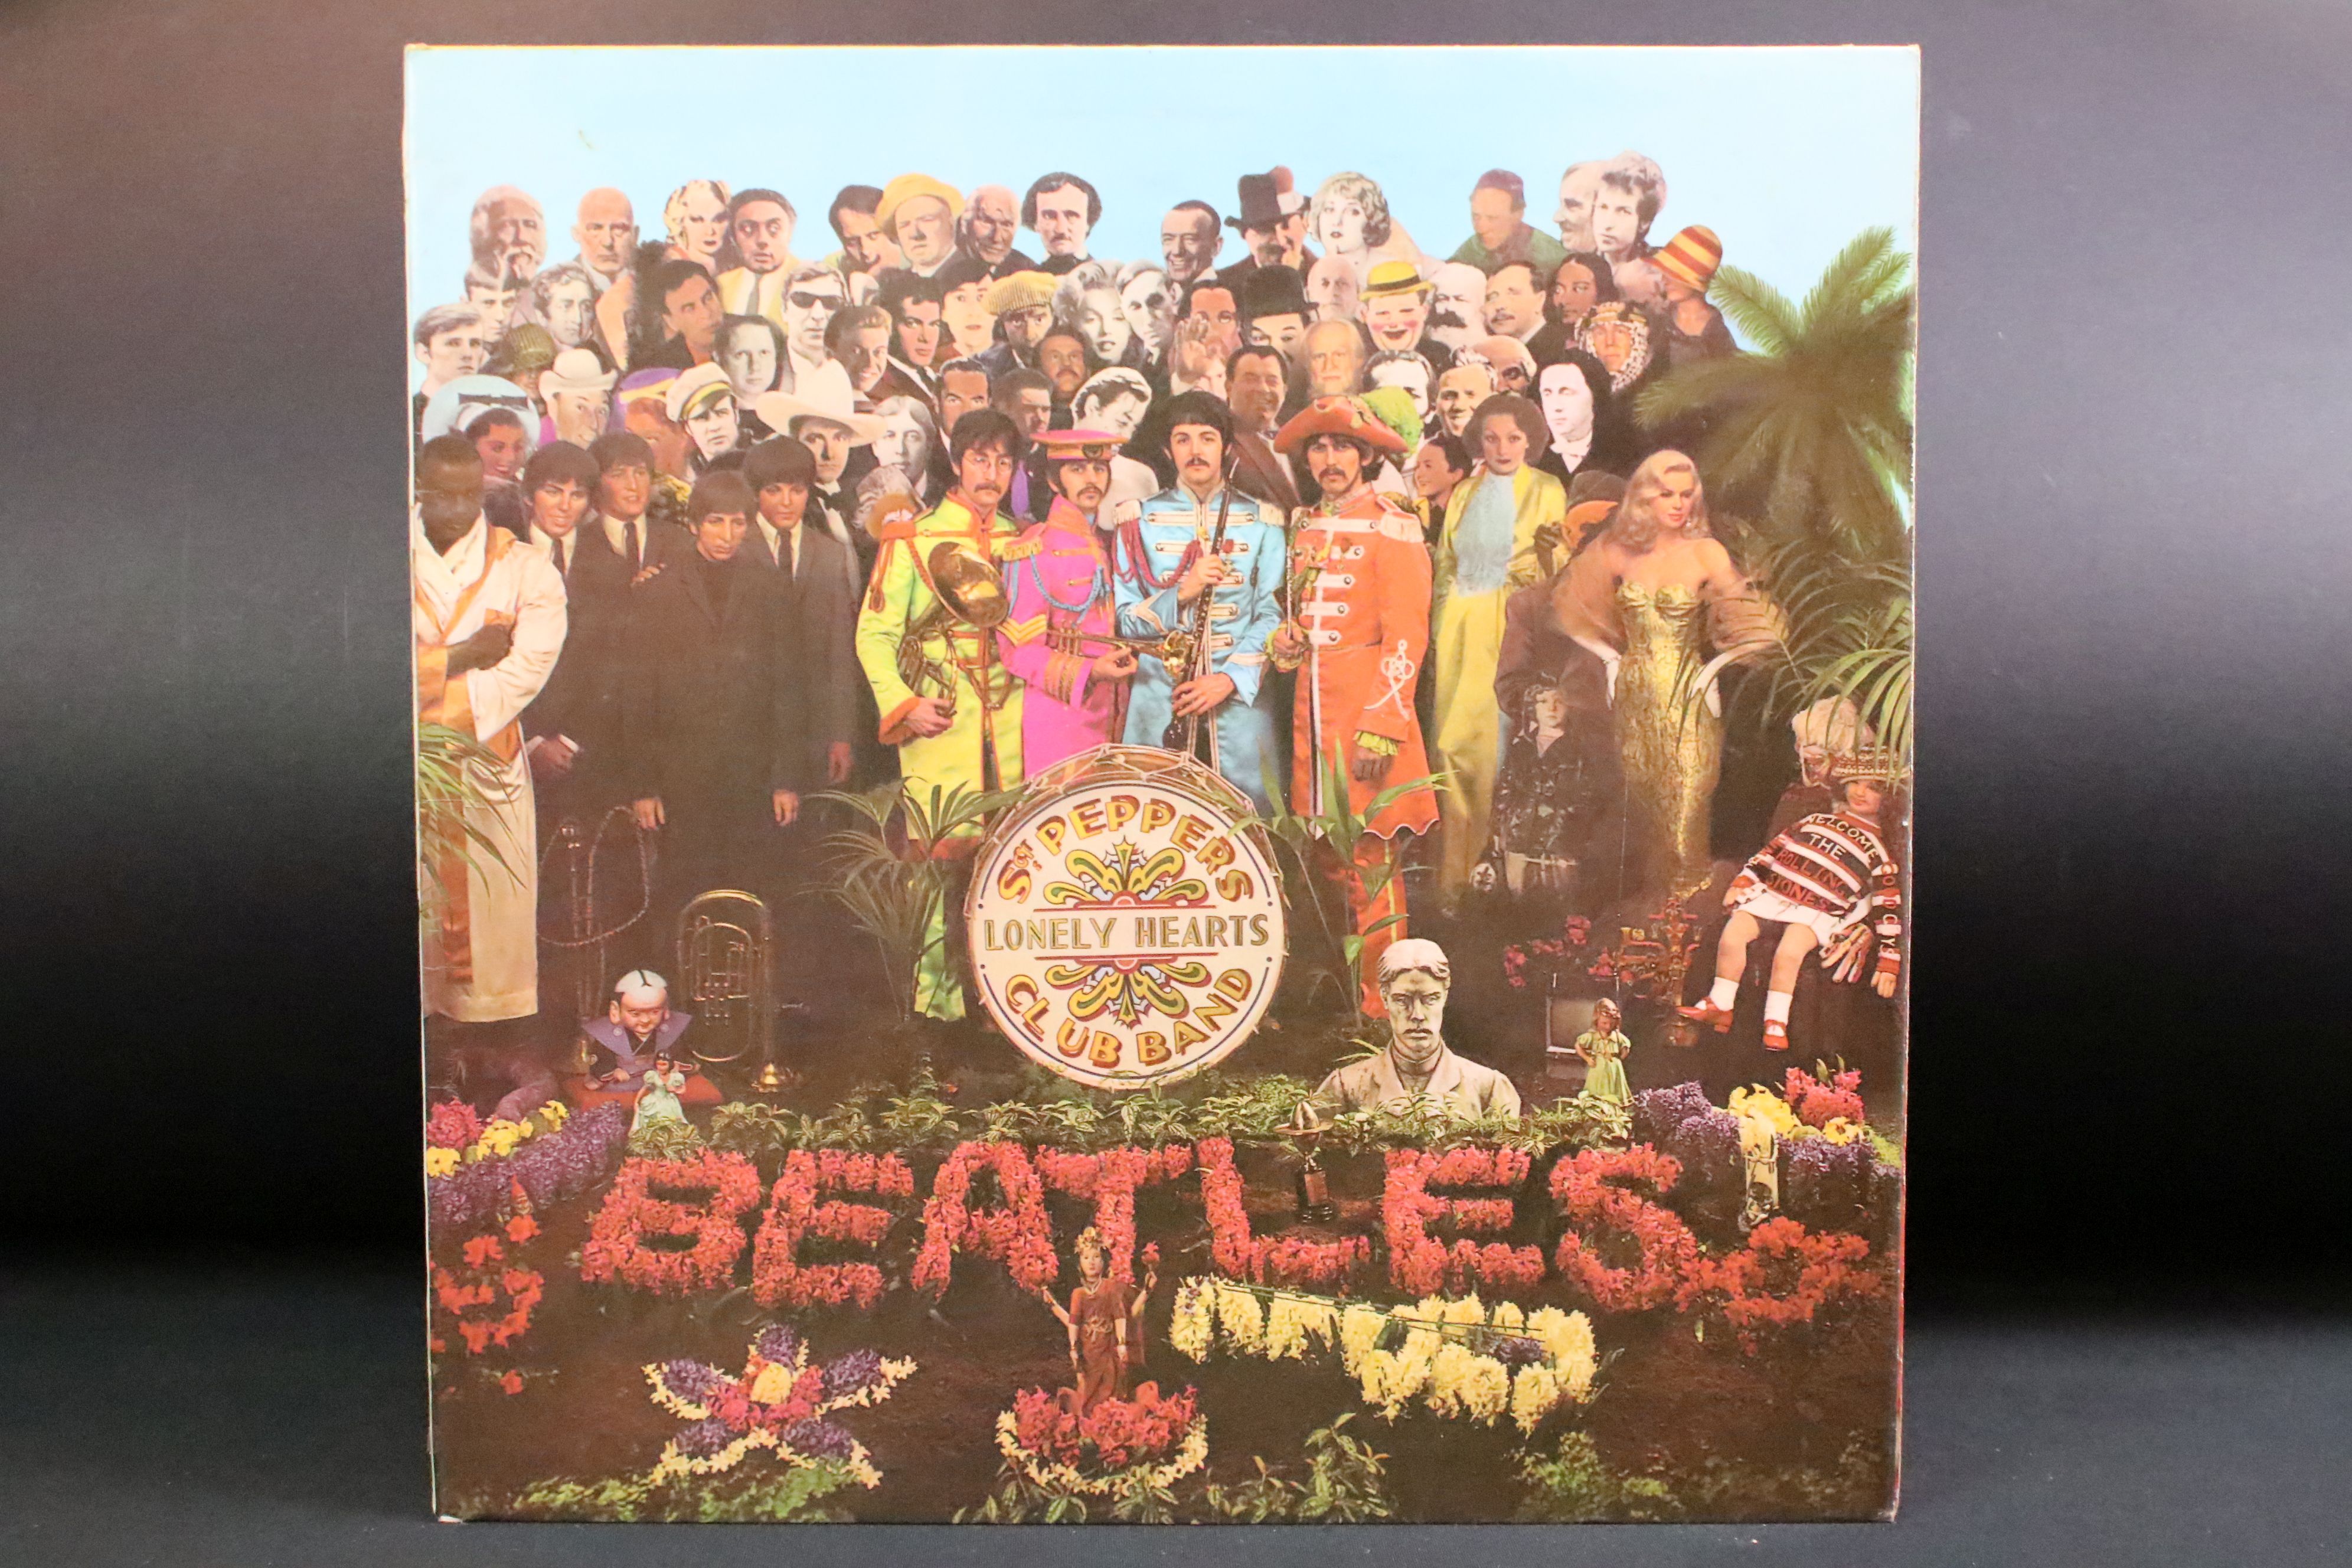 Vinyl - 7 The Beatles LPs to include Sgt Pepper, Revolver, Hard Days Night, Rubber Soul, Help!, With - Image 2 of 8